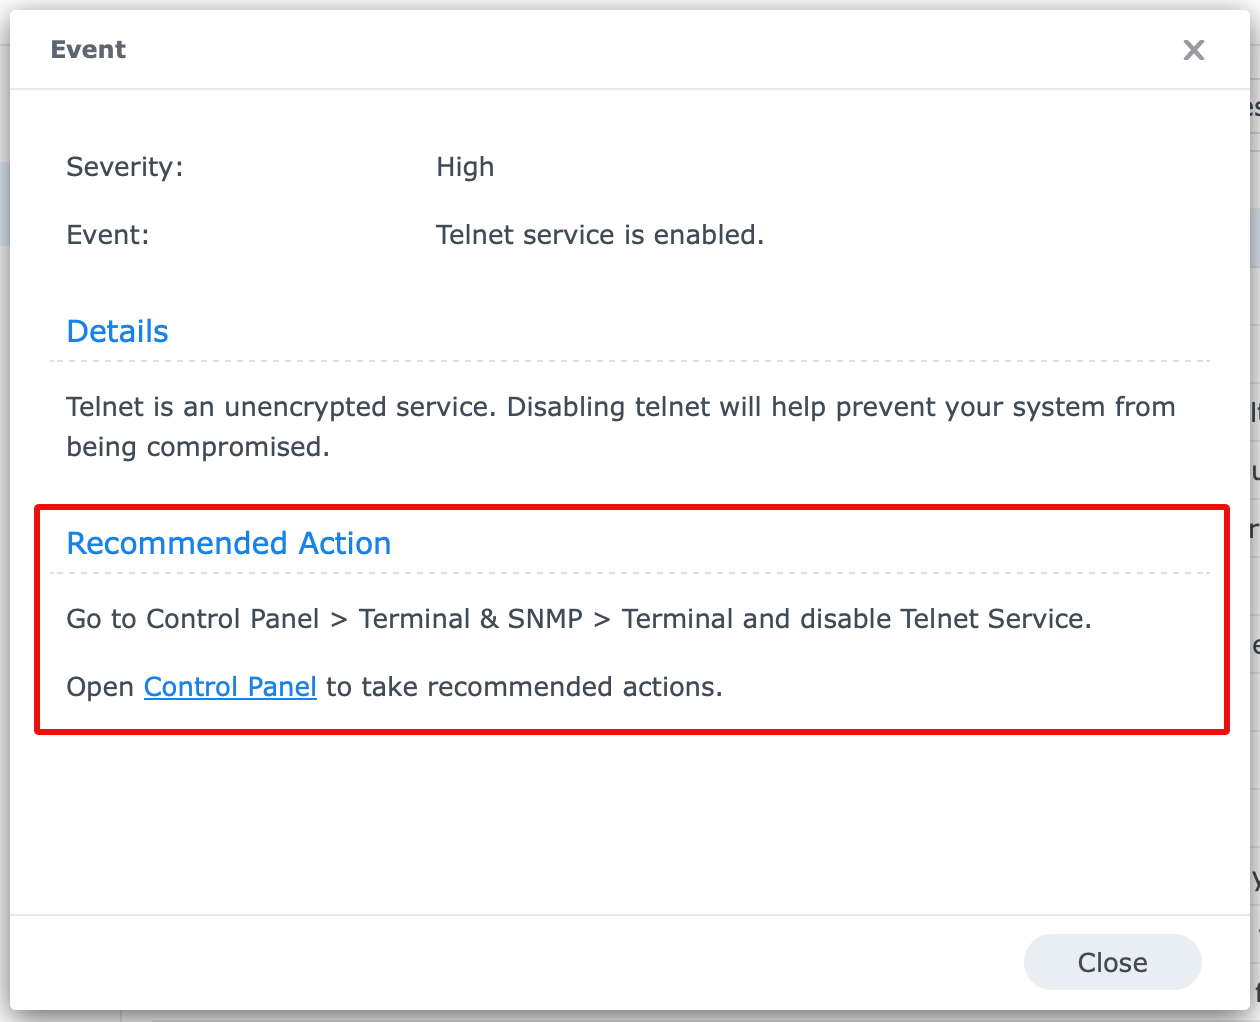 synology, security advisor, results, event, dsm7